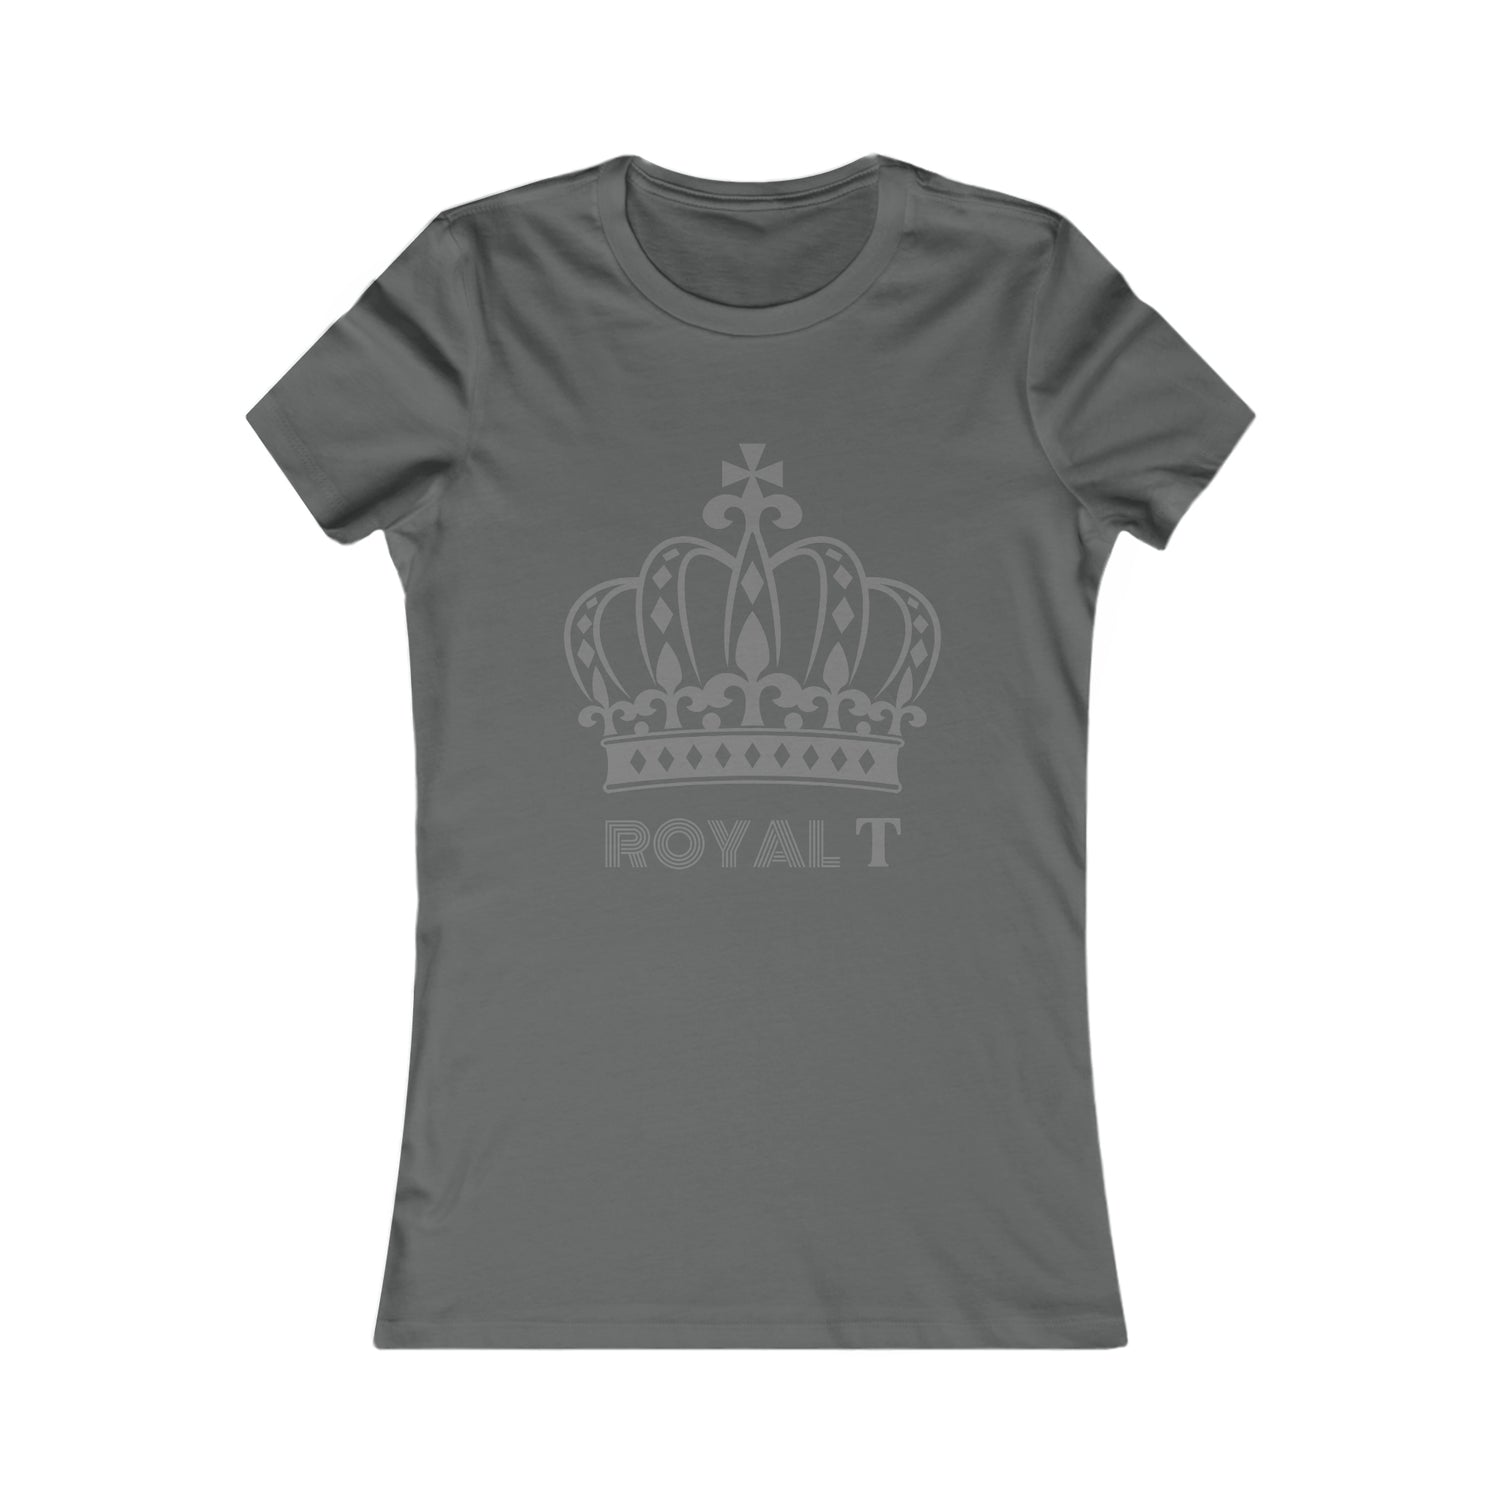 Womens Favourite Tee Royal T